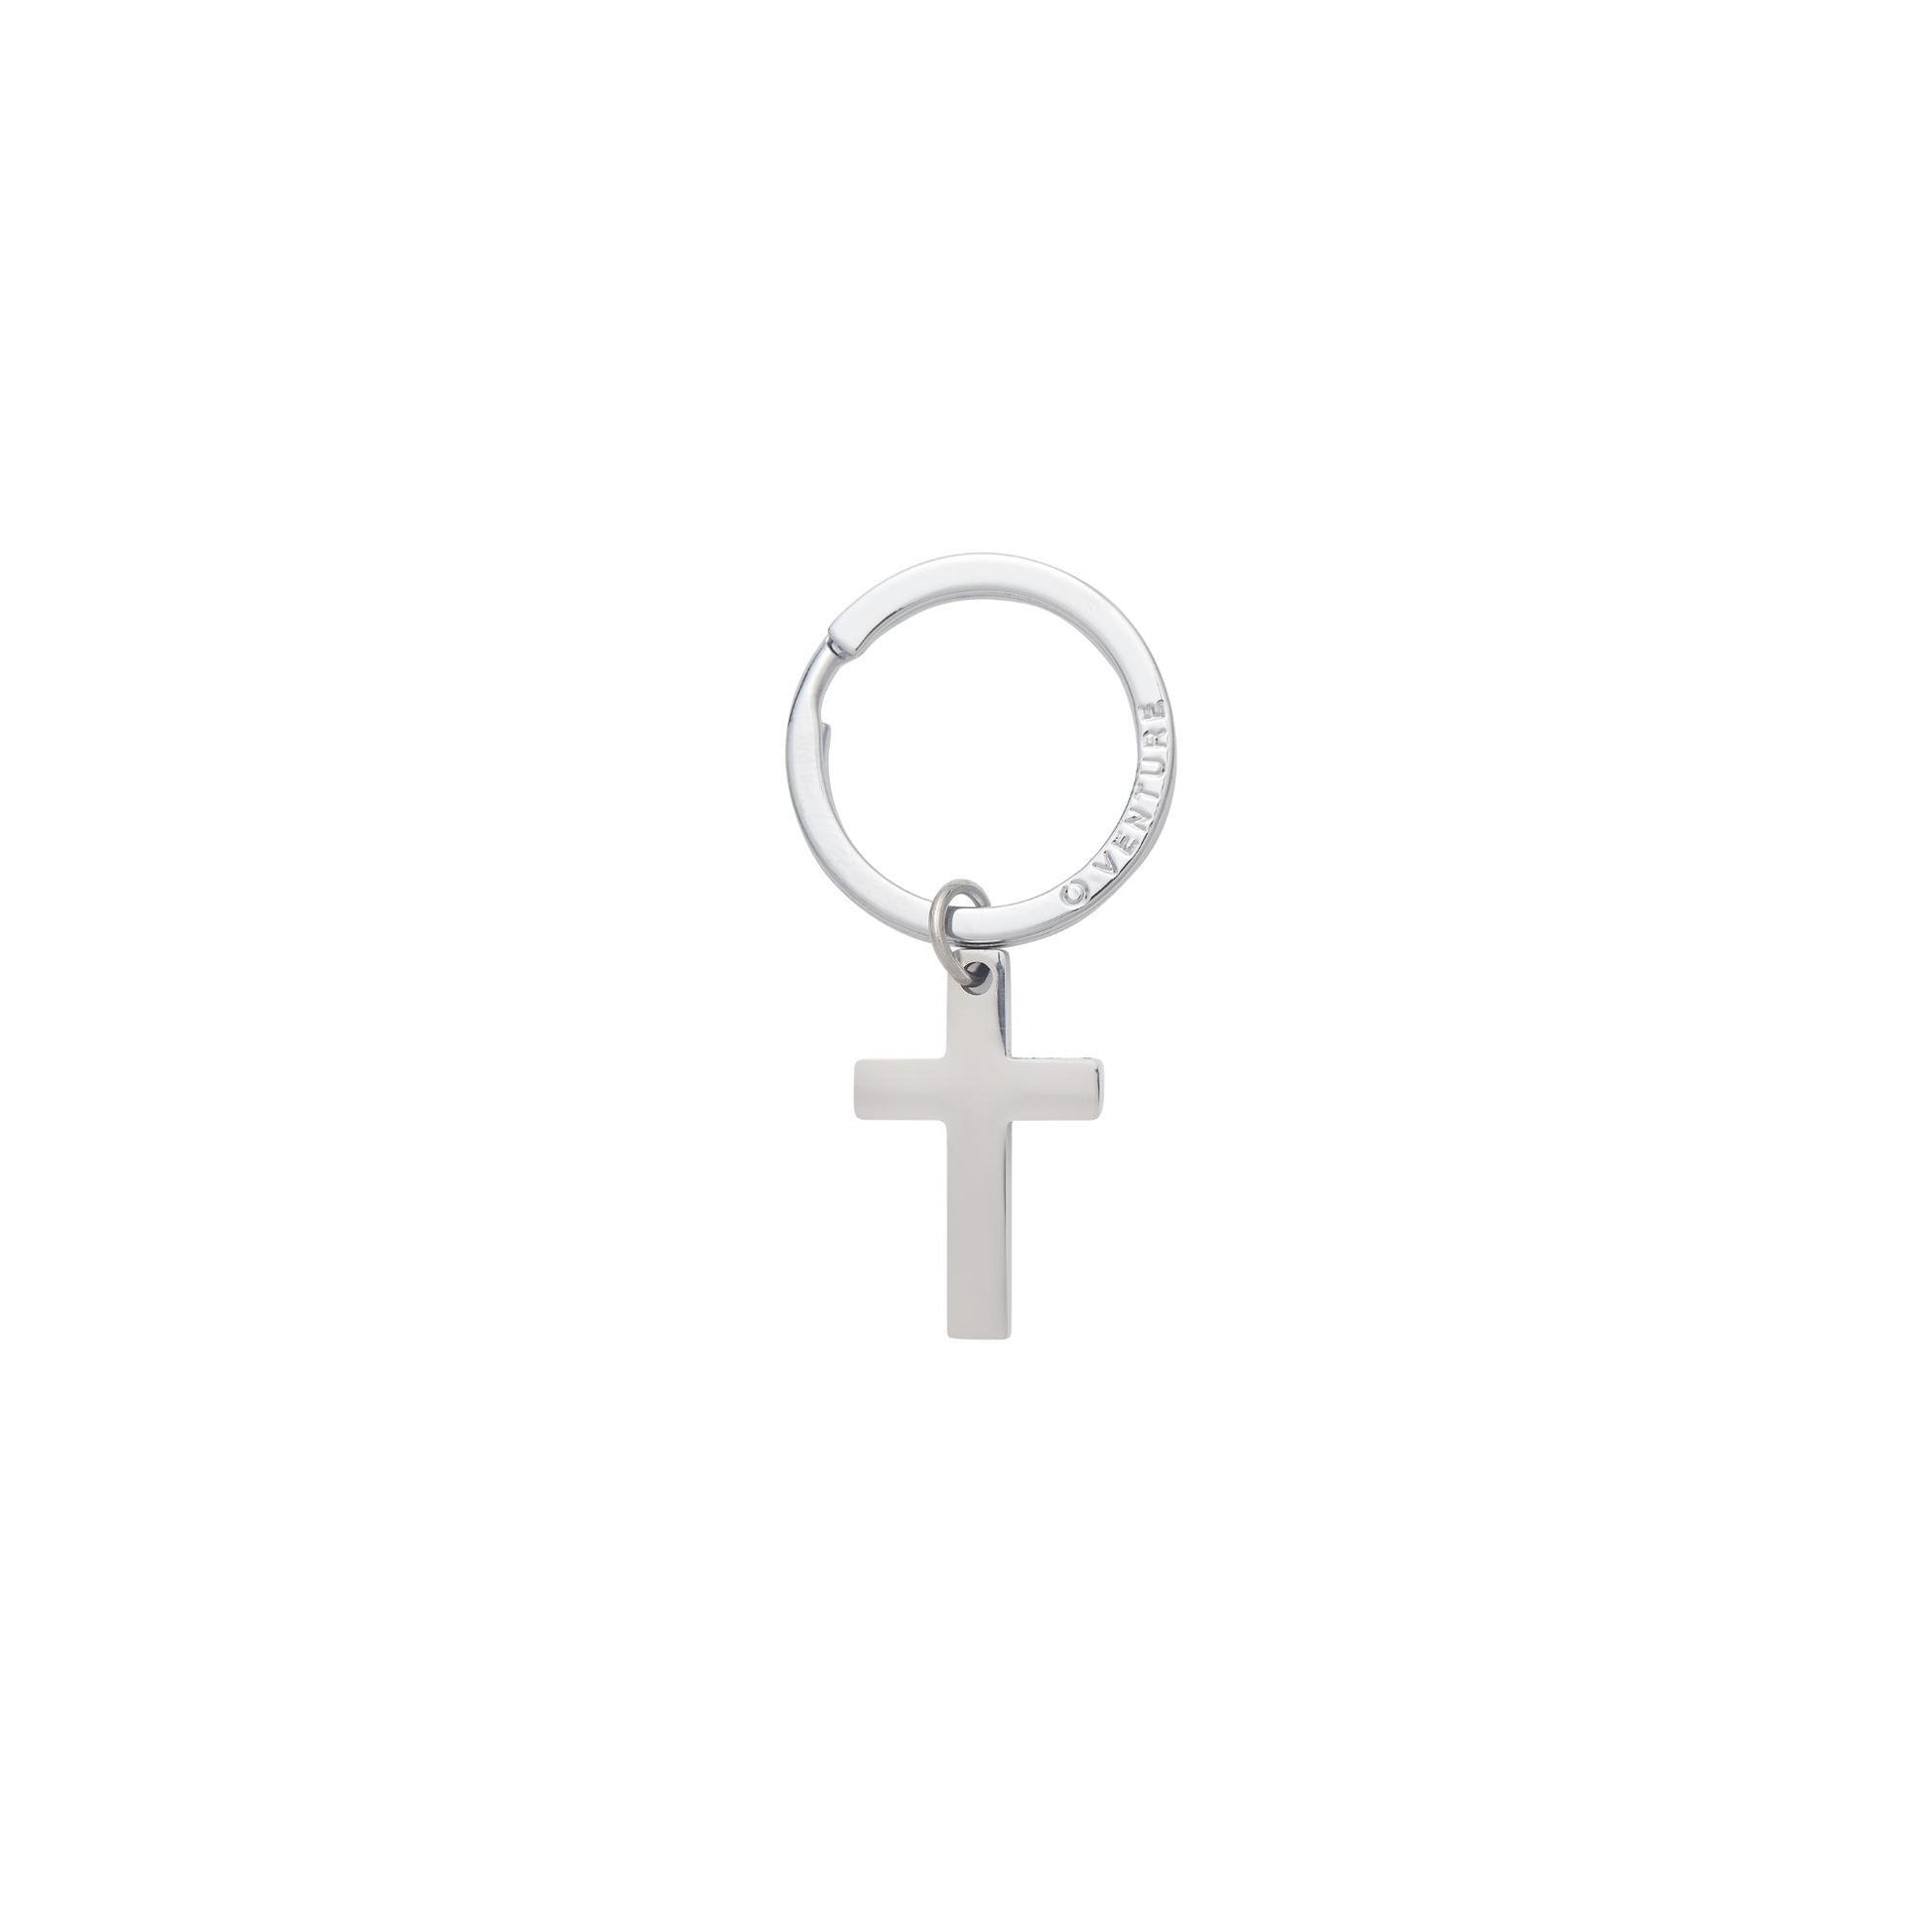 Silver cross key chain. This can be used on its own or as a charm to attach to your big o keyring. It is a silver cross